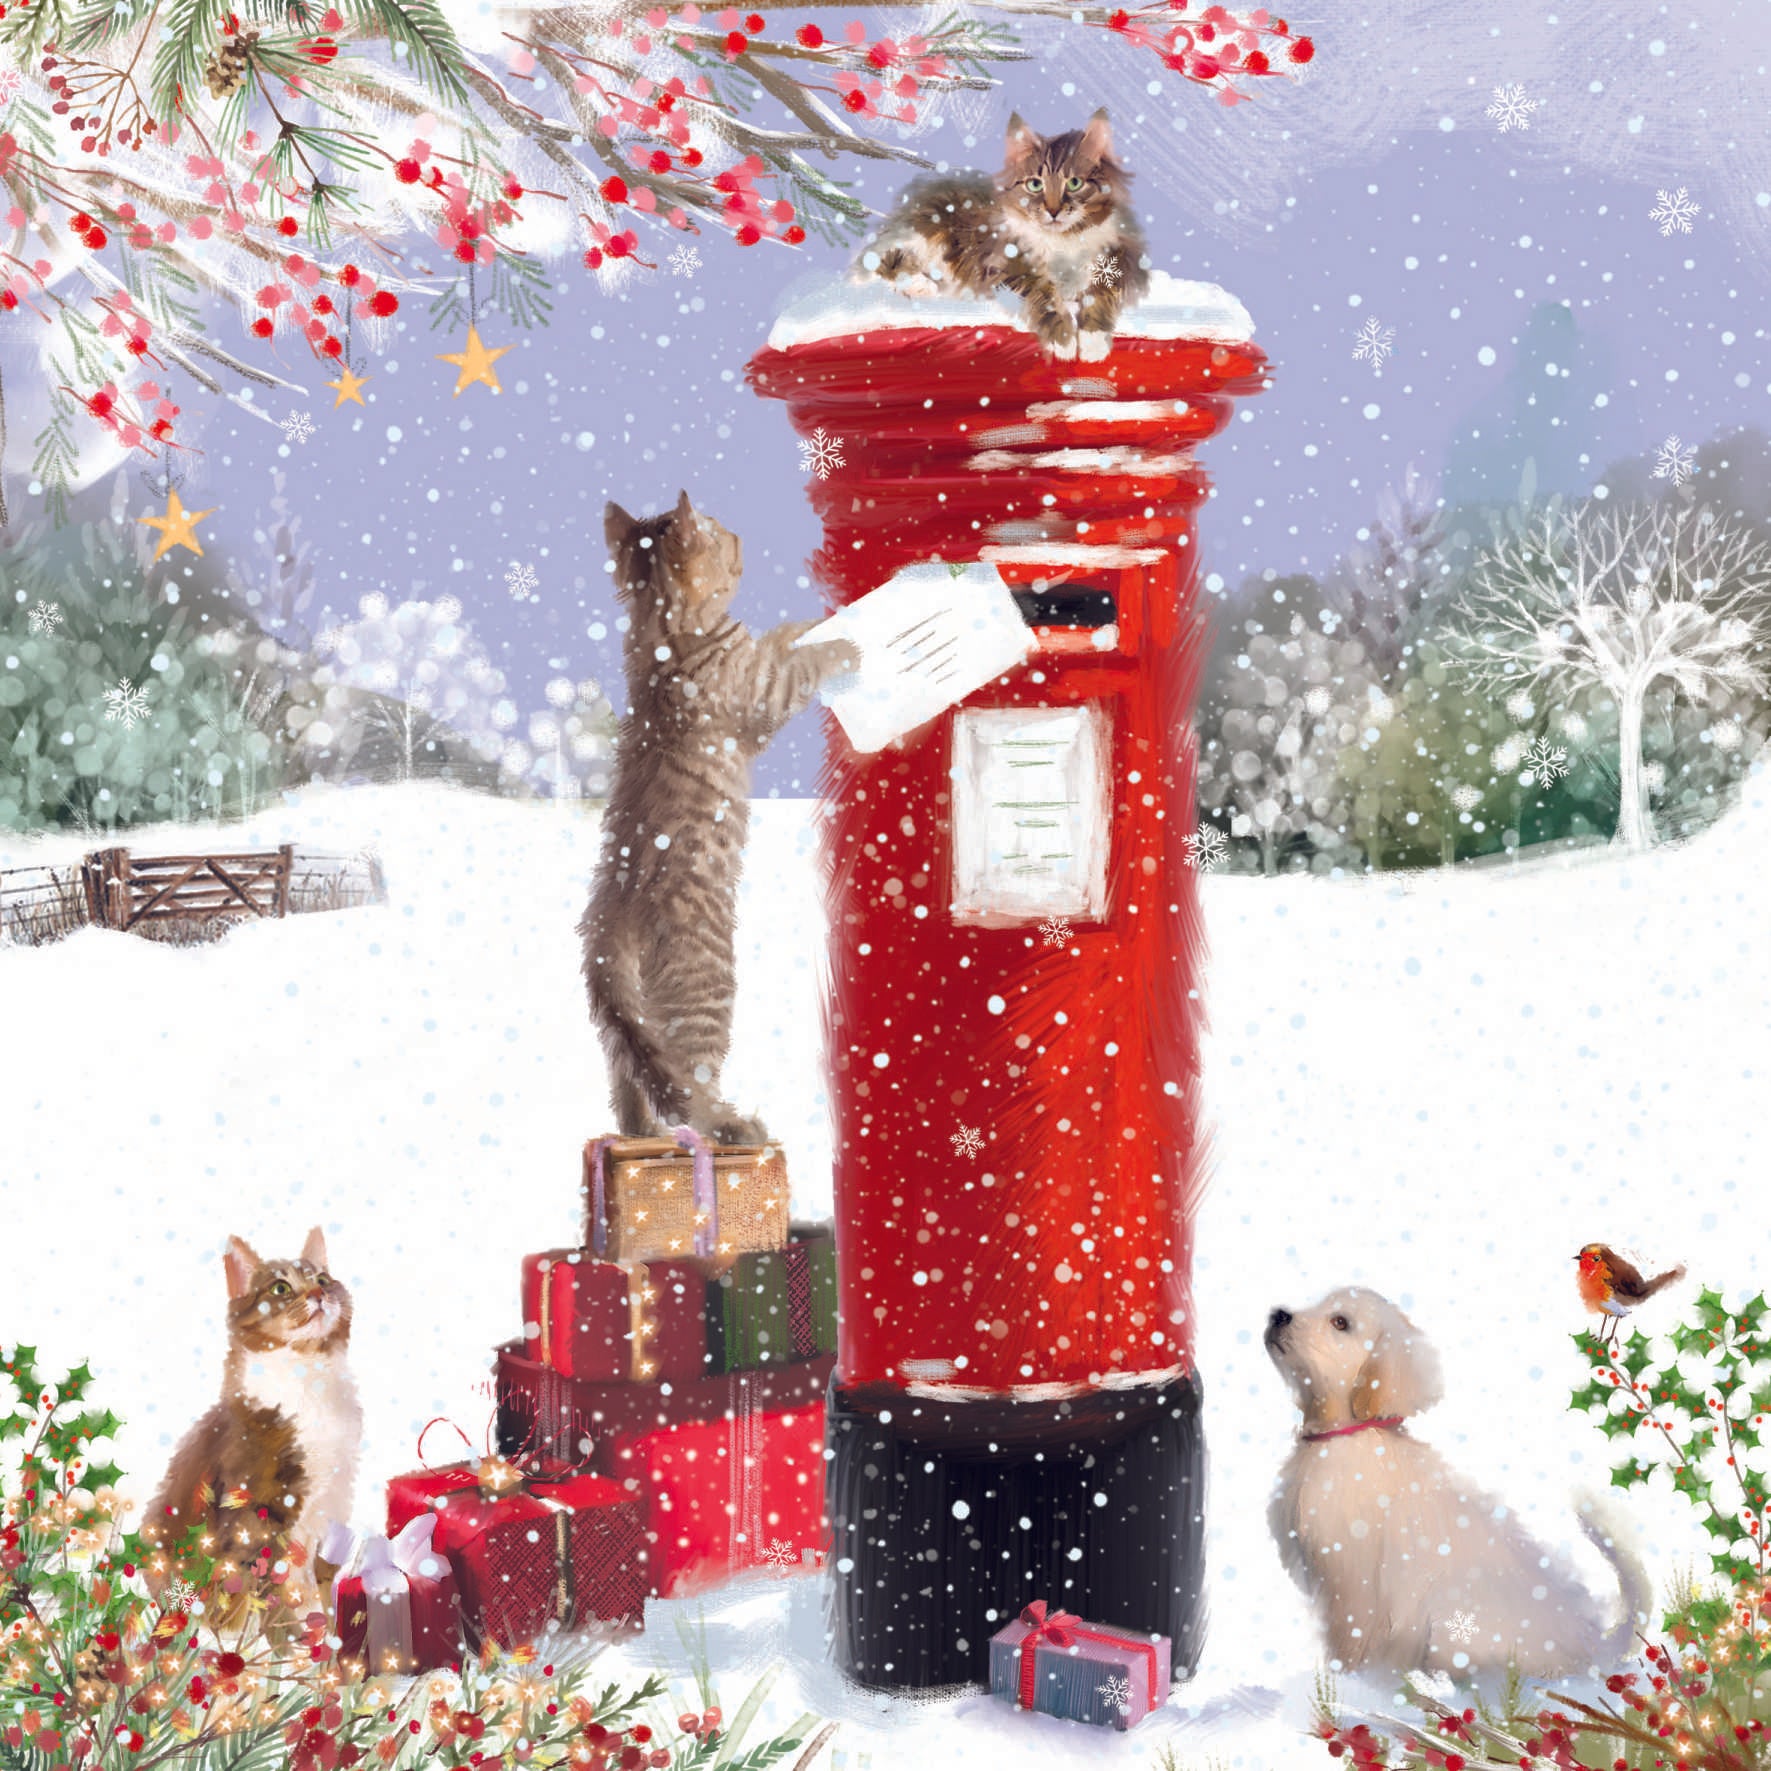 The design shows an illustrated snowy country setting and three tabby cats around a postbox with one posting a letter. There are a group of presents besides the postbox and a yellow Labrador puppy and robin looking on.